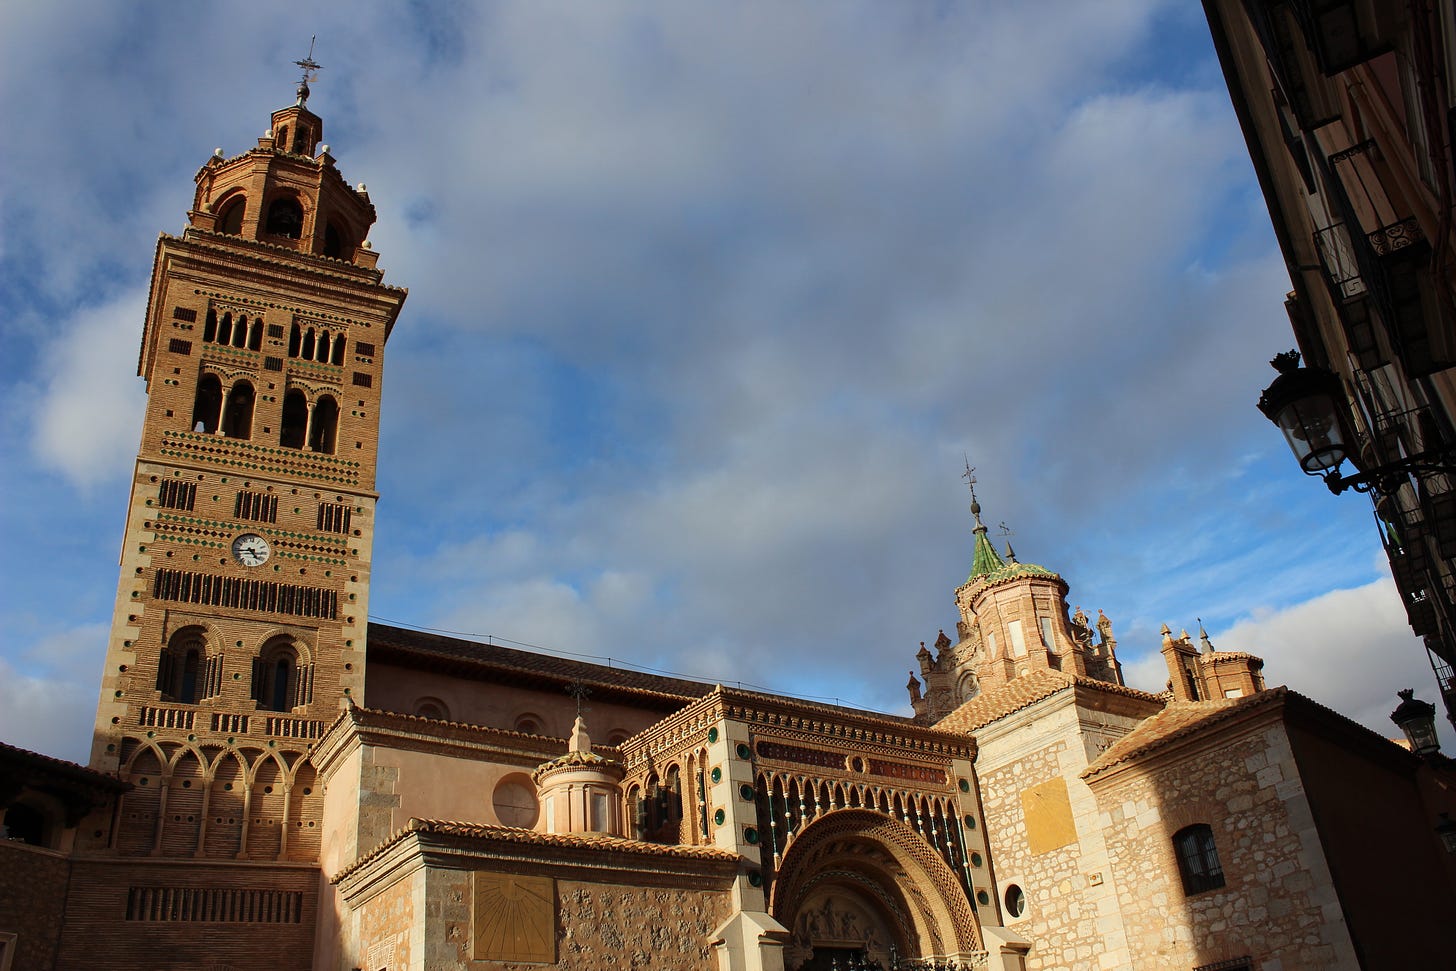 A Mudéjar style cathedral sits below a brooding cloudy sky in Teruel.